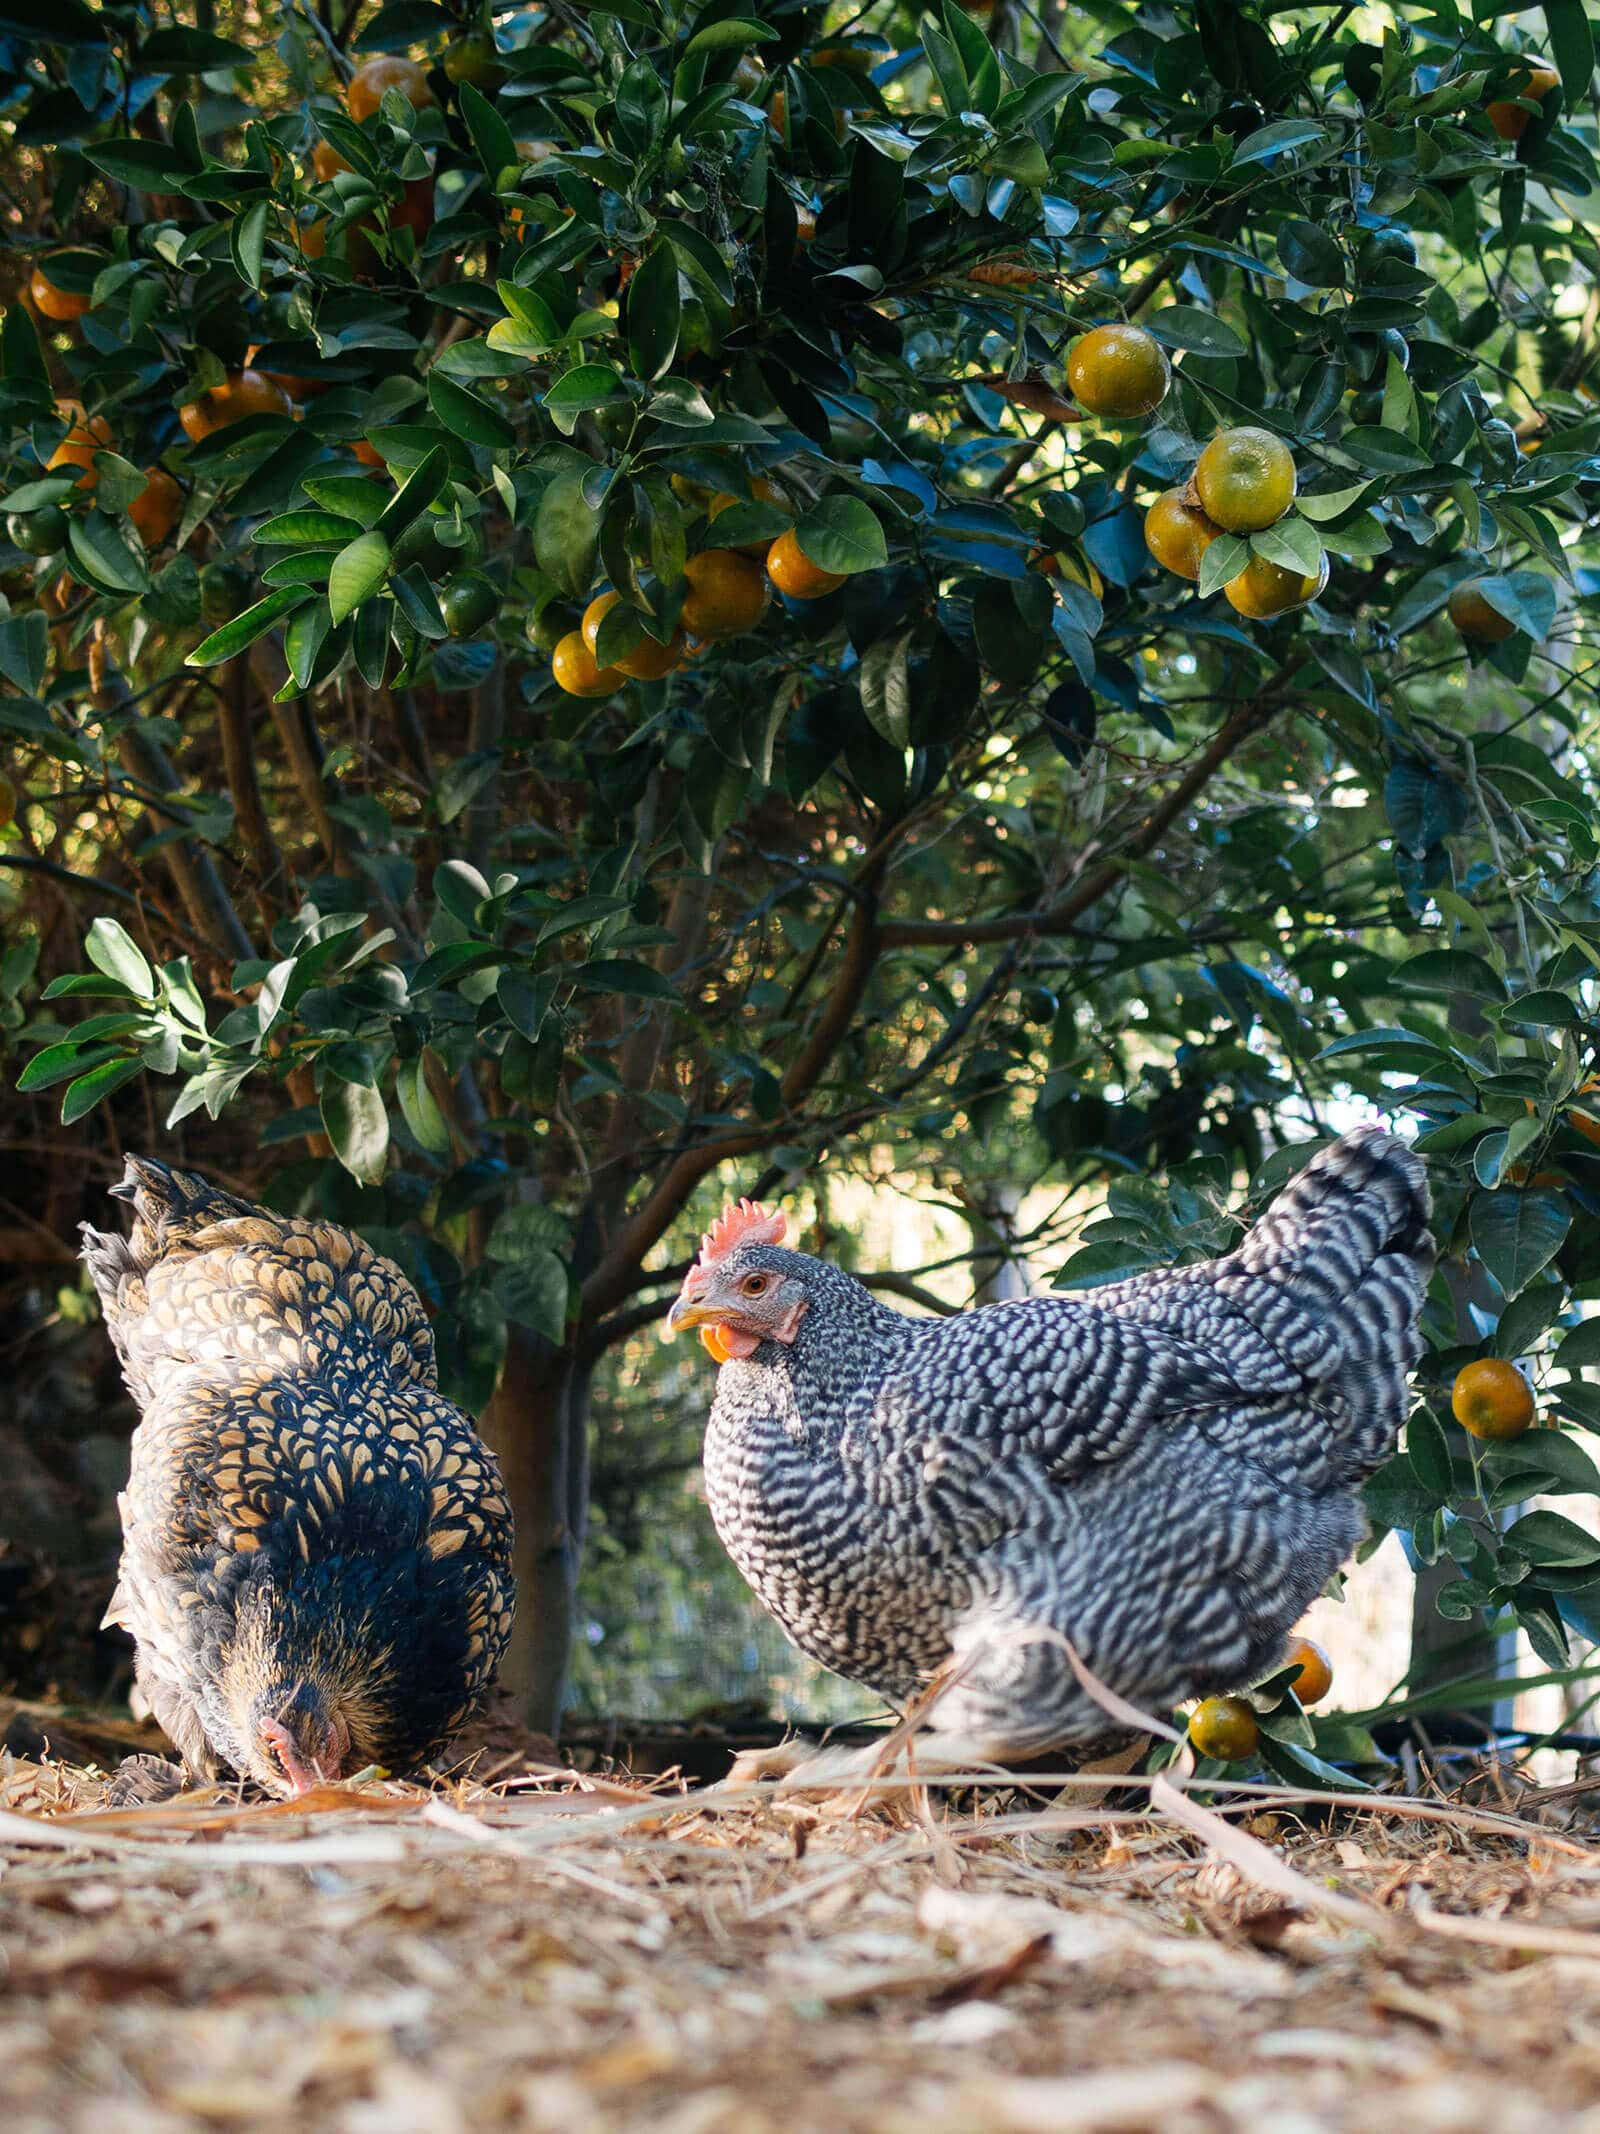 Cochin and Barred Rock scratching in the garden with a mandarin tree in the background